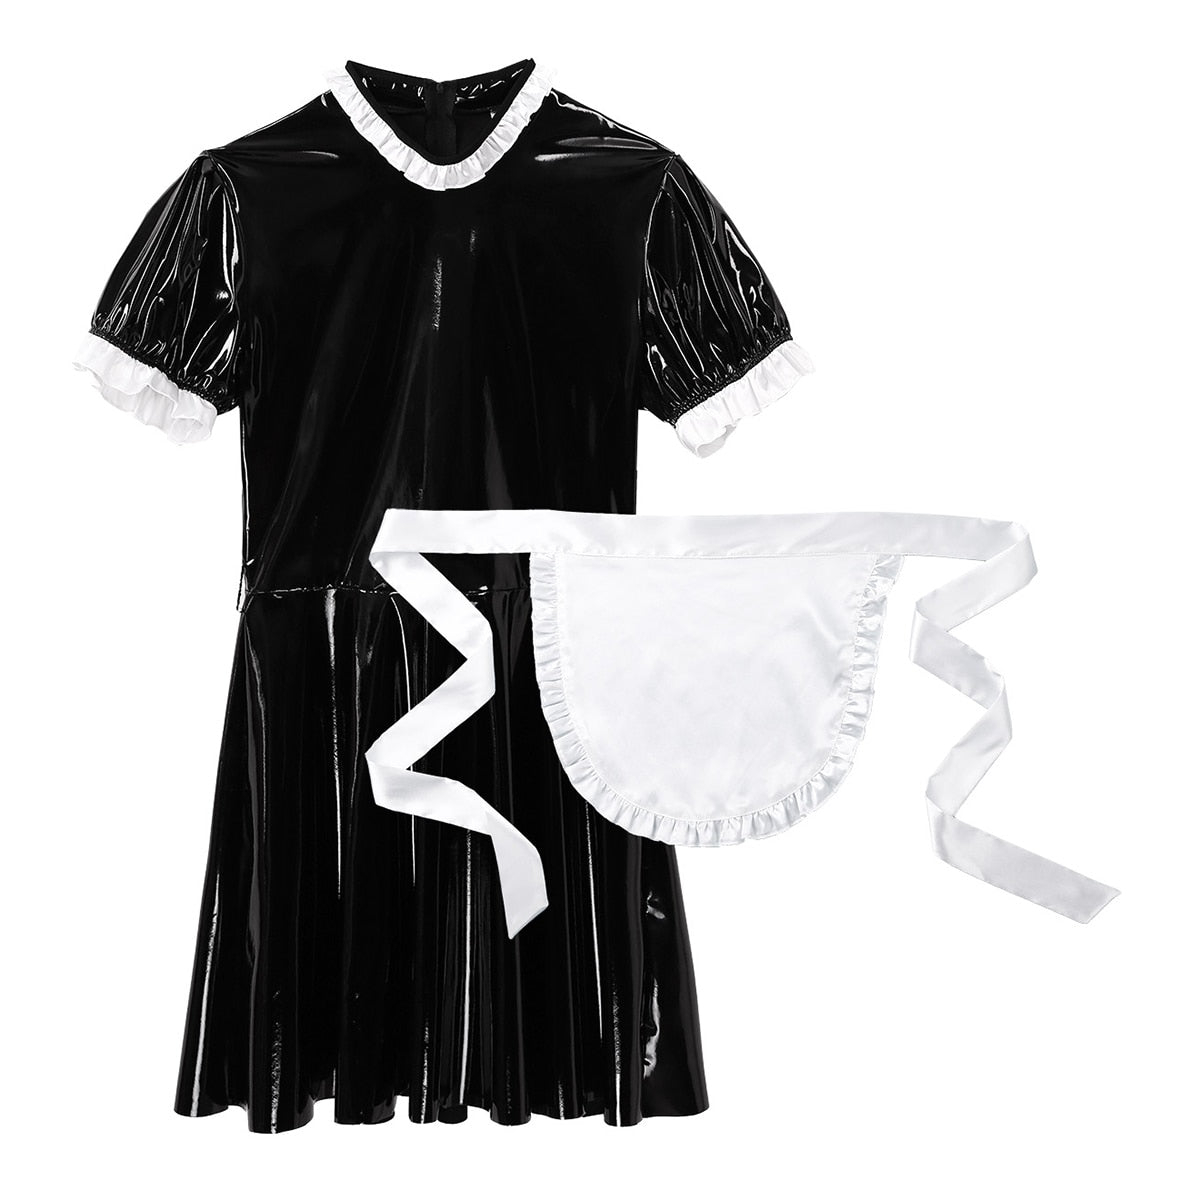 Maid Outfit For Men